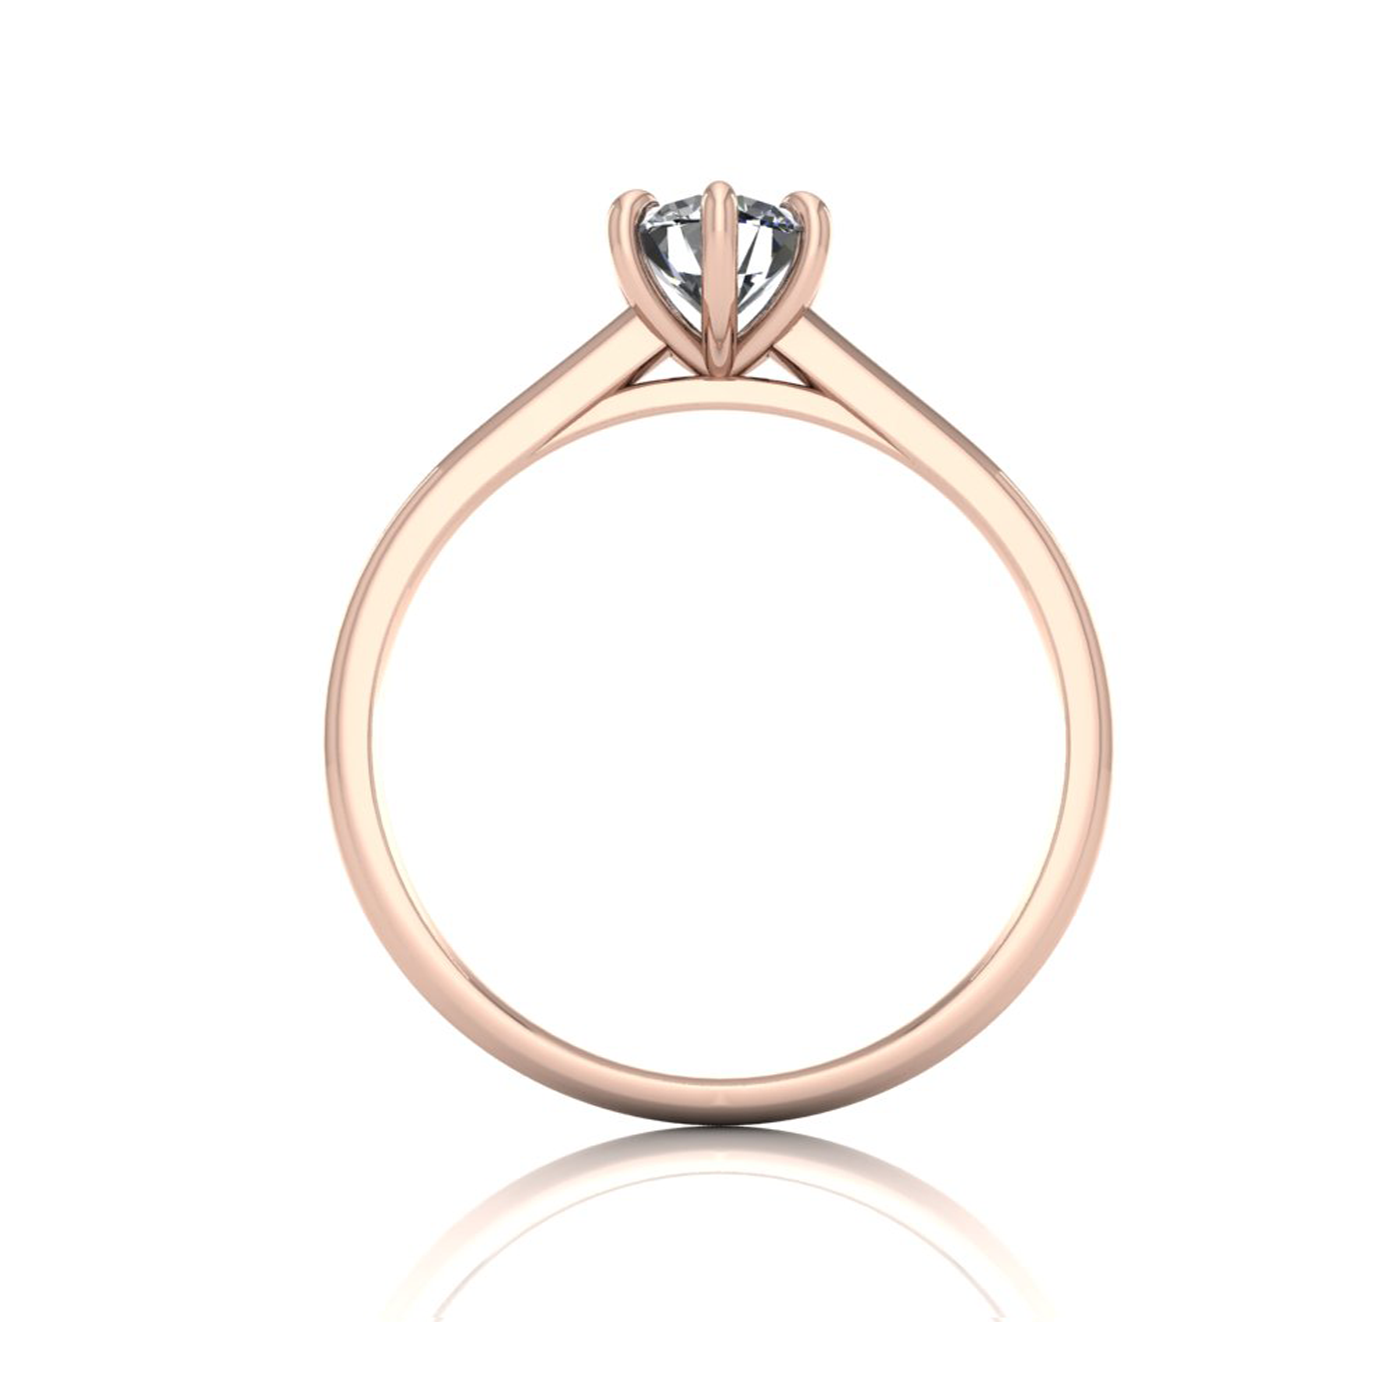 18k rose gold 0,50 ct 6 prongs solitaire round cut diamond engagement ring with whisper thin band